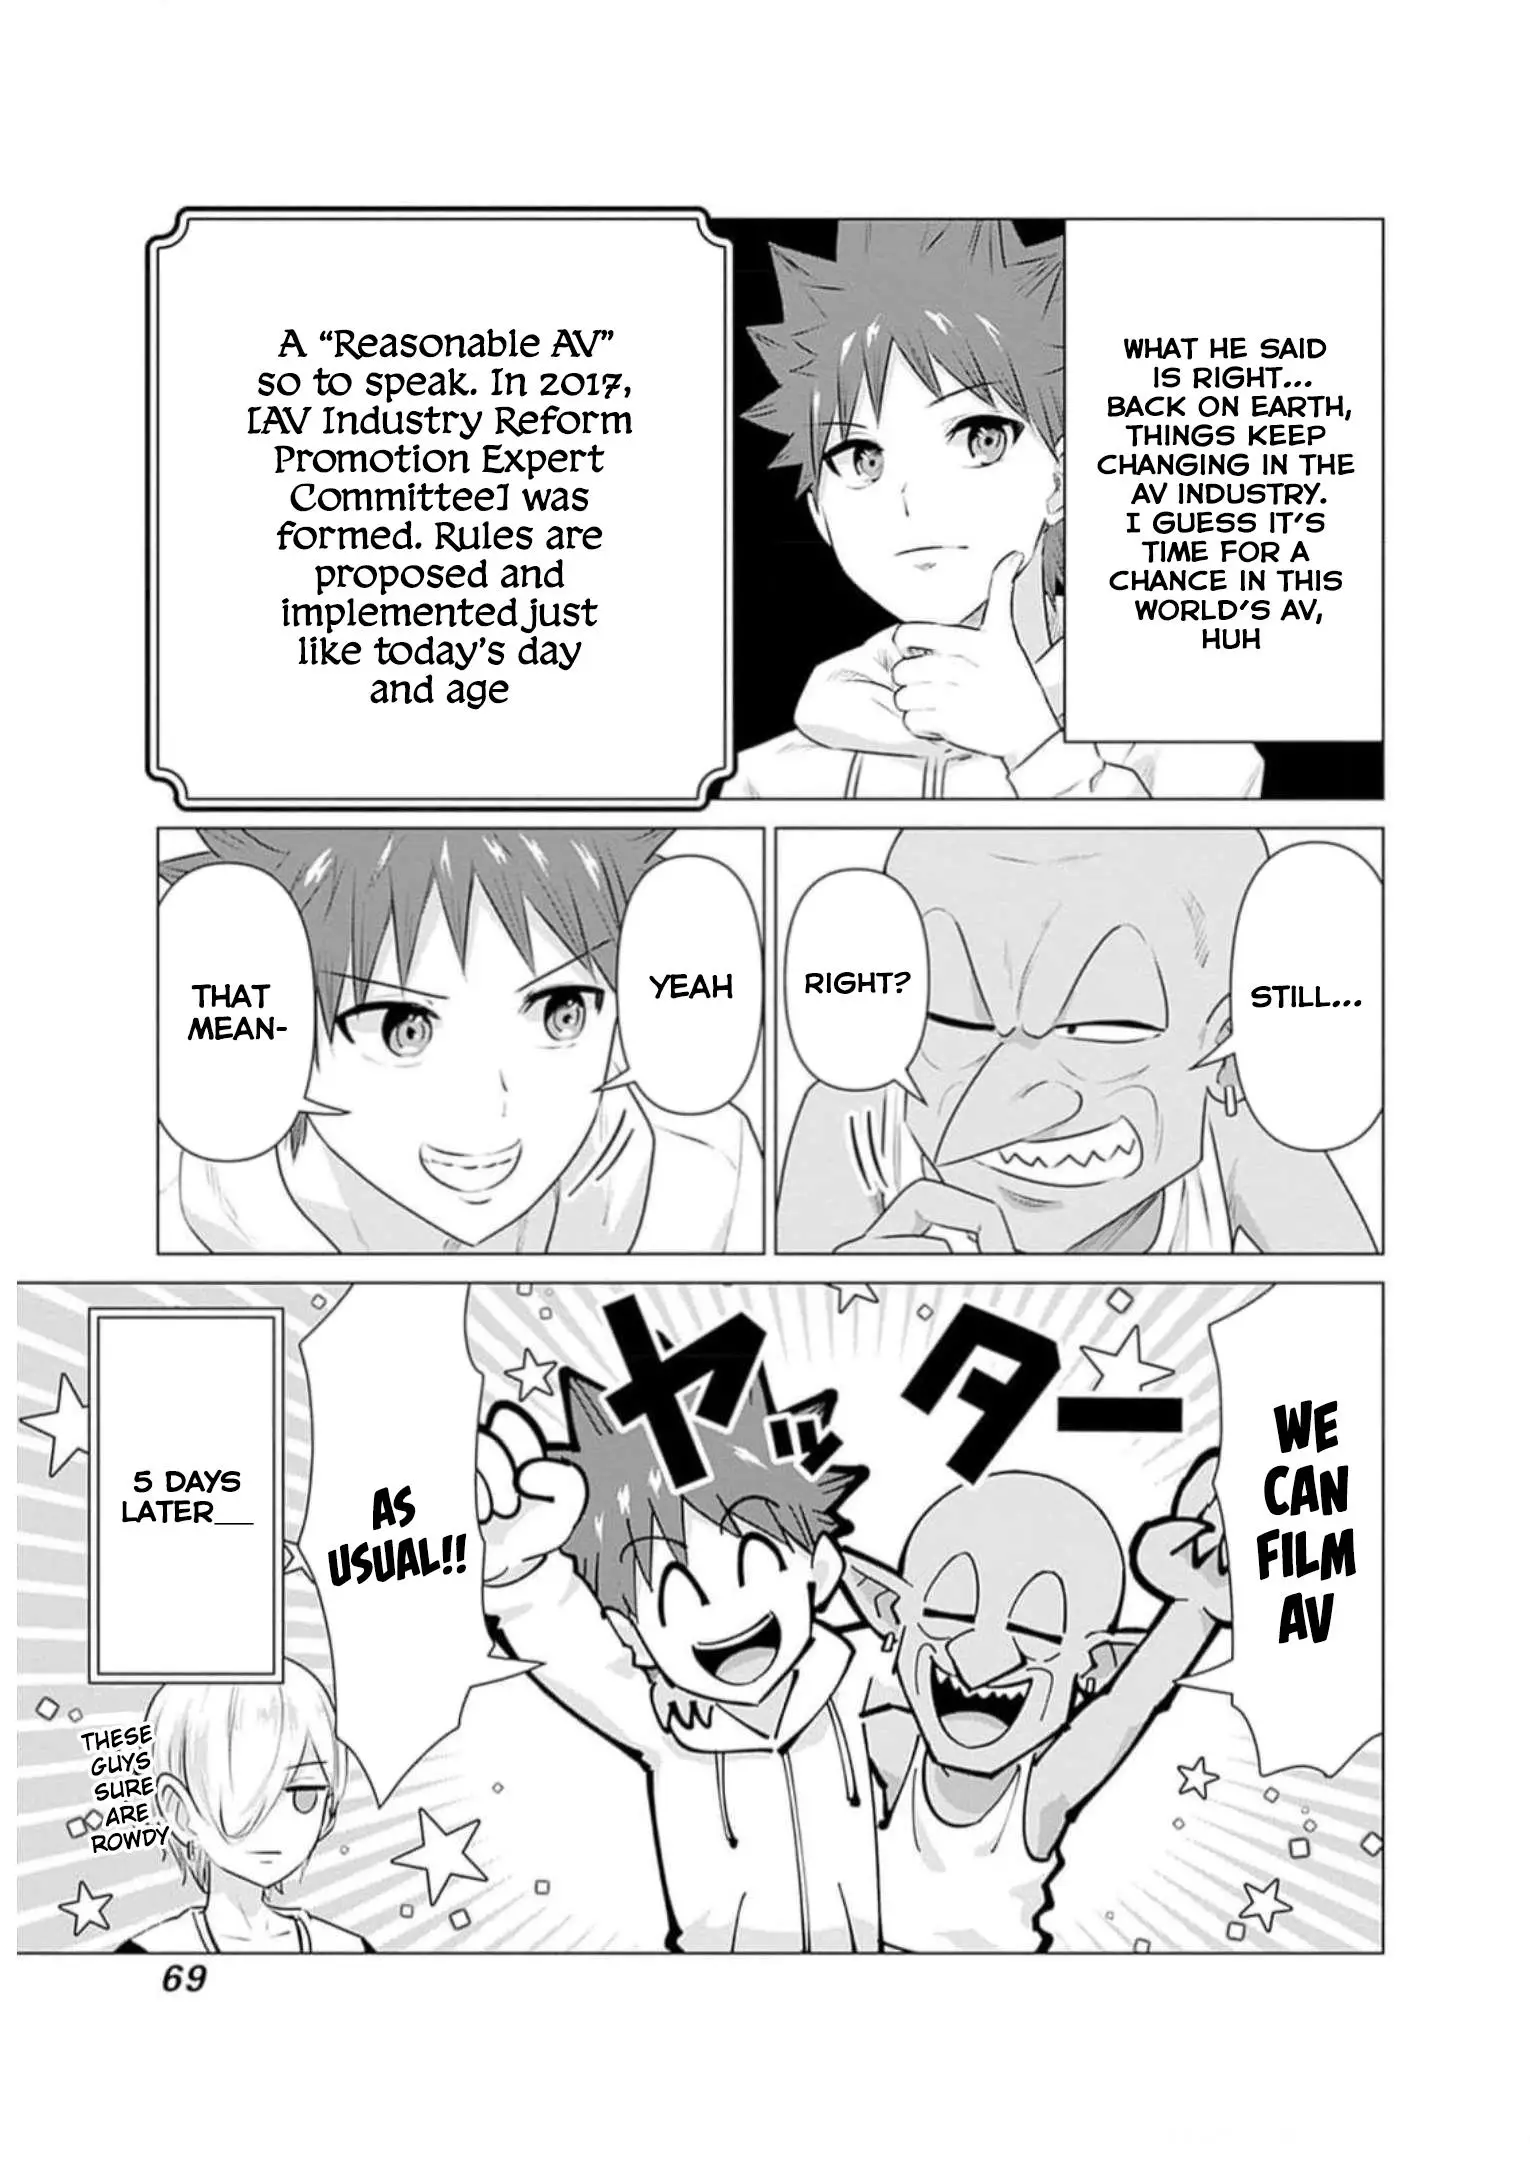 Pornstar In Another World ~A Story Of A Jav Actor Reincarnating In Another World And Making Full Use Of His Porn Knowledge To Become A Matchless Pornstar~ - 26 page 6-b4a69568